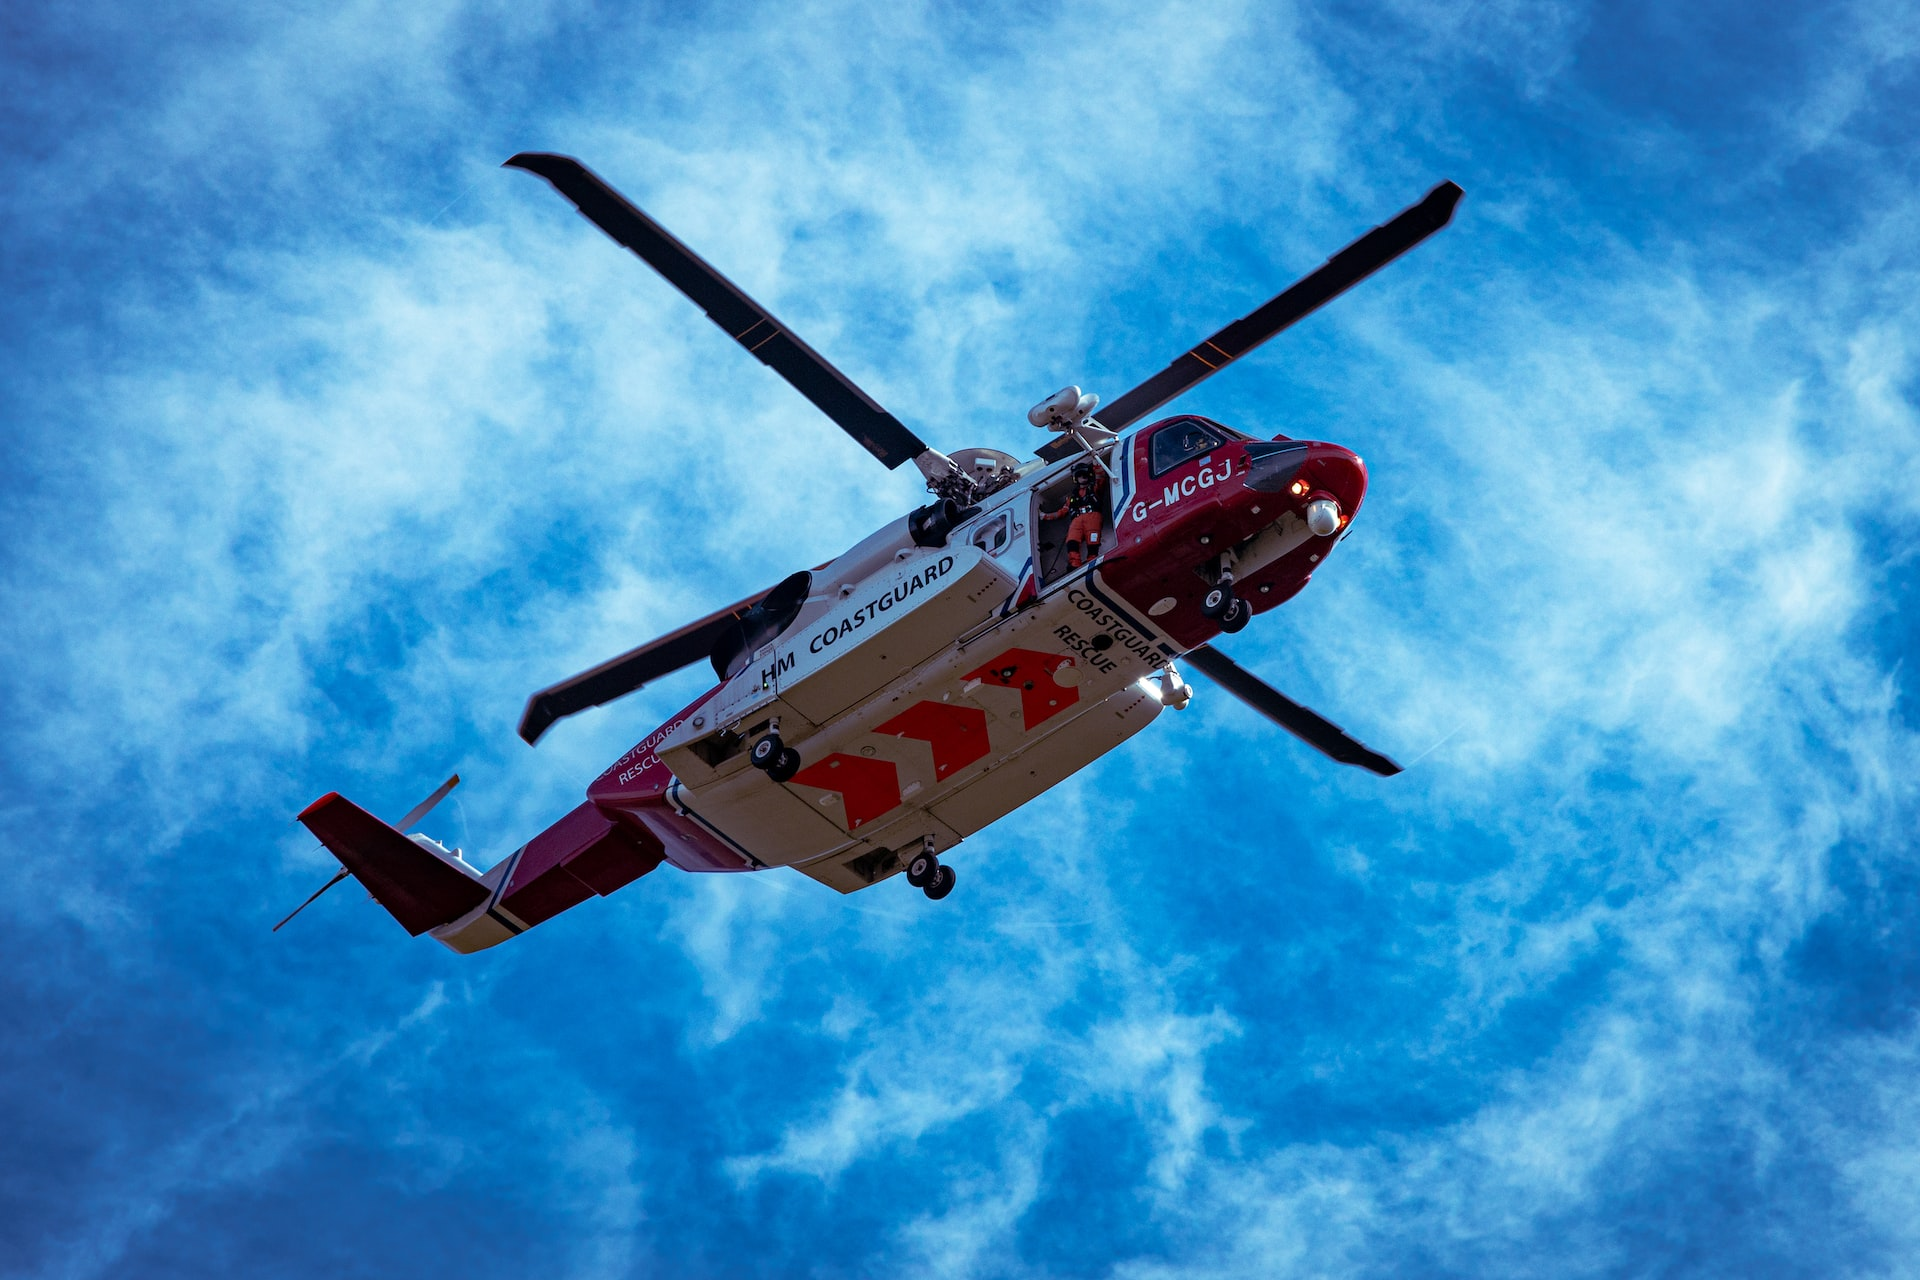 A coast guard/hospital helicopter hovering in blue sky.